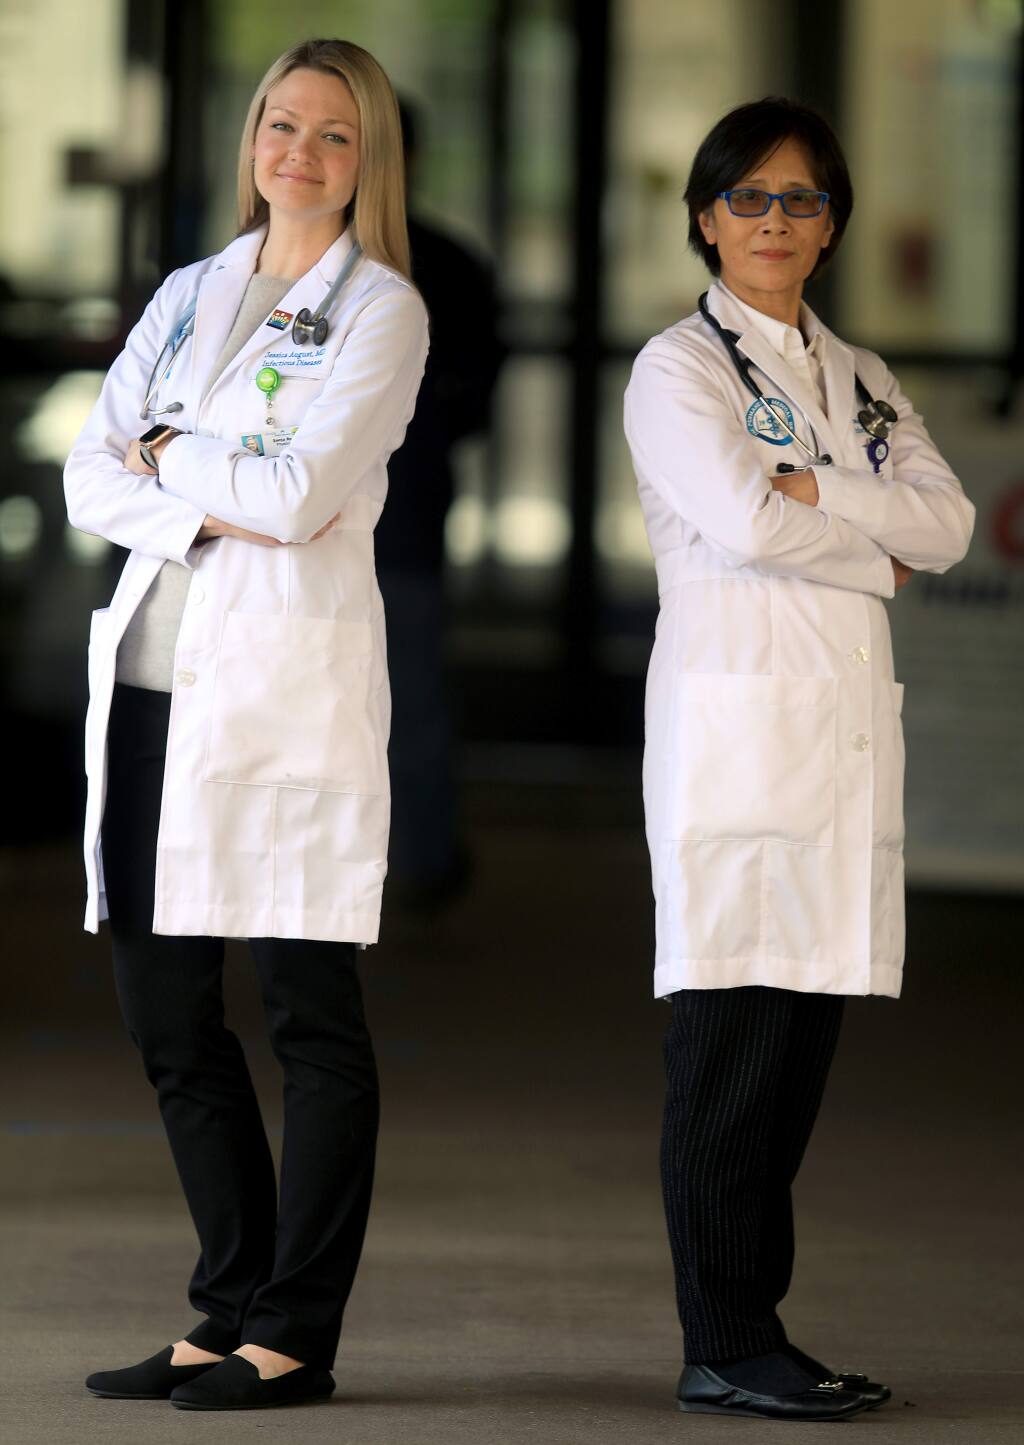 Kaiser Hospital's infectious disease specialists, Drs. Jessica August, left, and Shu Yang, Tuesday, March 31, 2020 in Santa Rosa. (Kent Porter / The Press Democrat) 2020